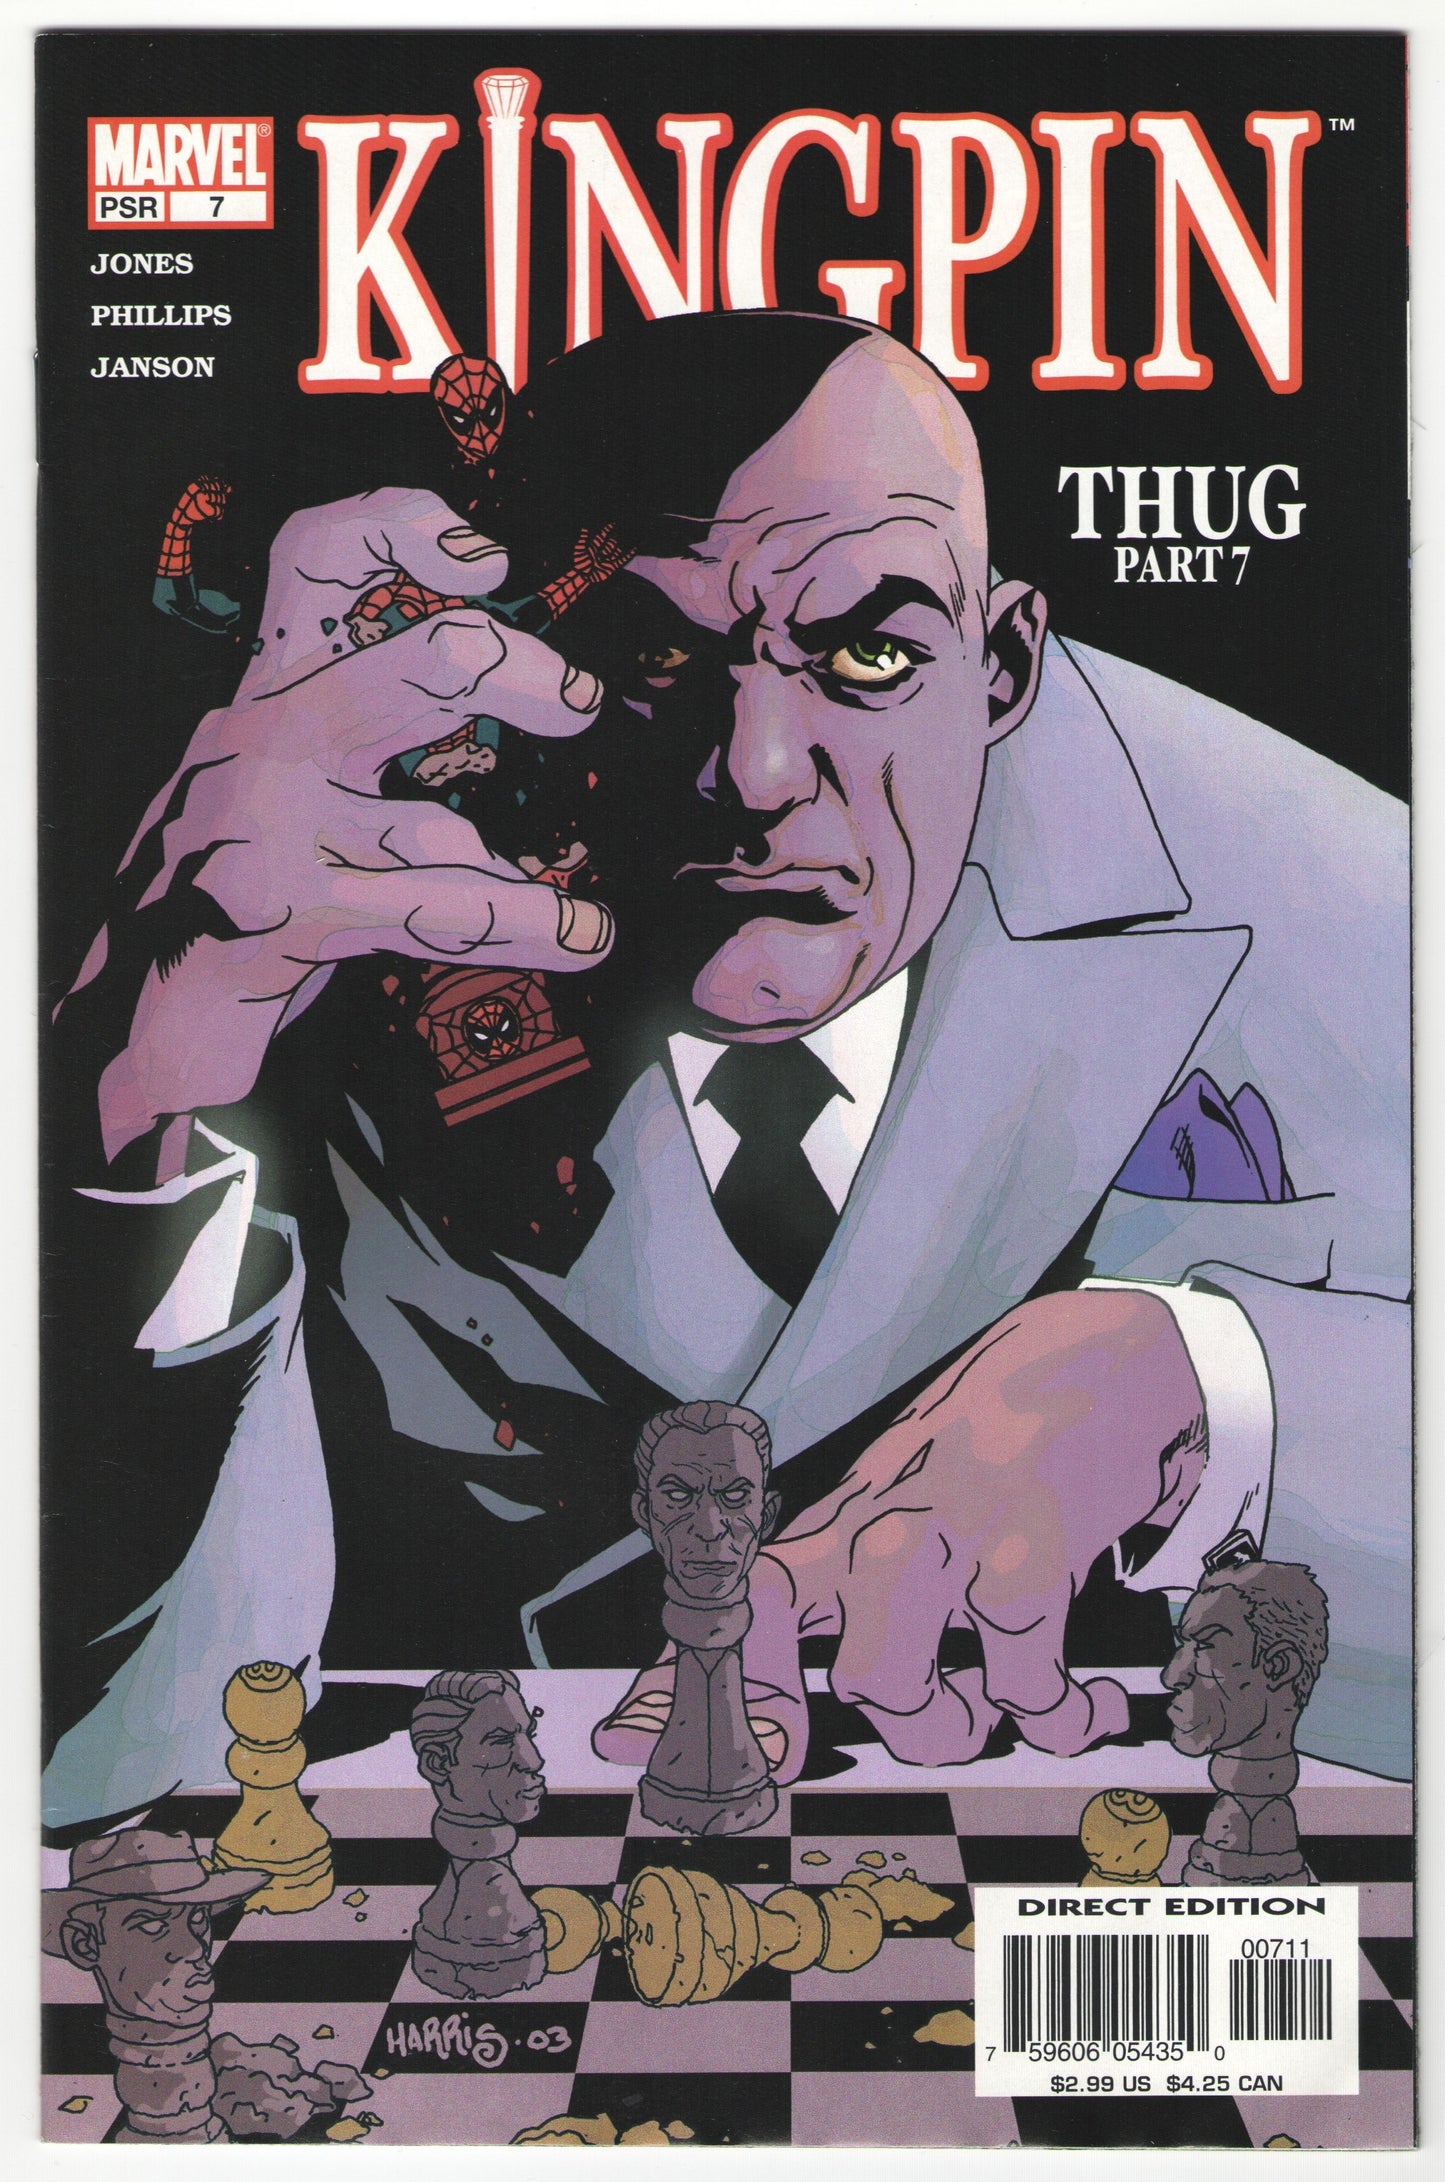 Kingpin (2003-2004) Complete Limited Series